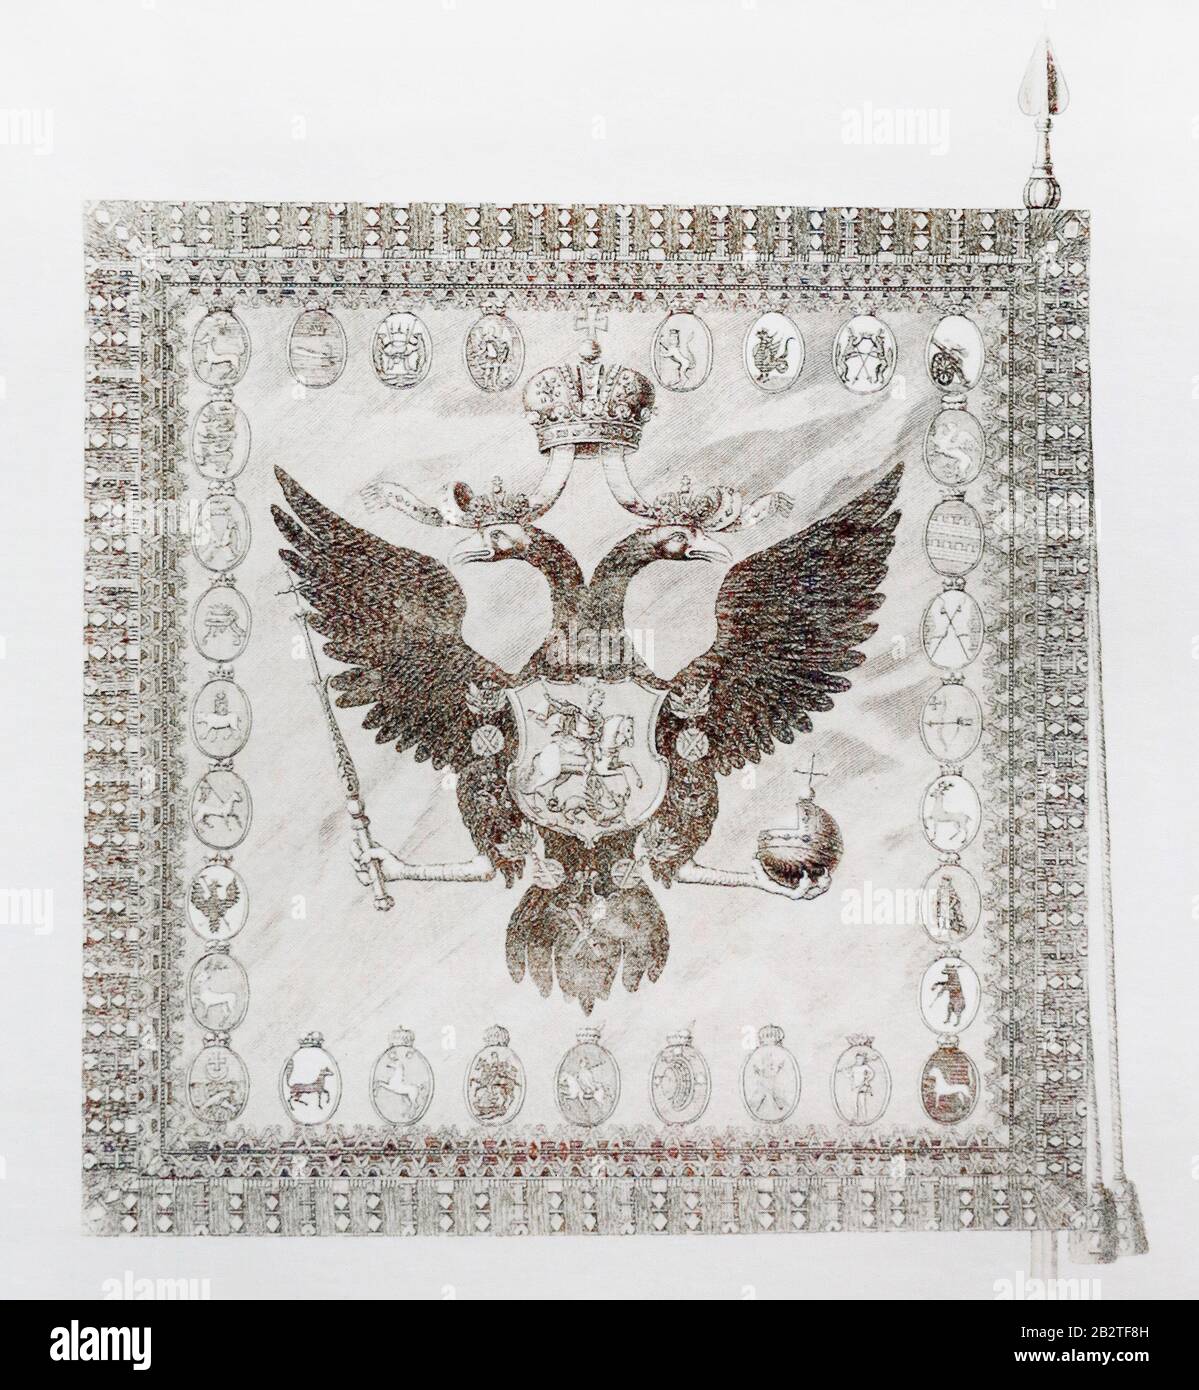 Double-headed eagle on the State banner of Russia of the 18th century. Stock Photo